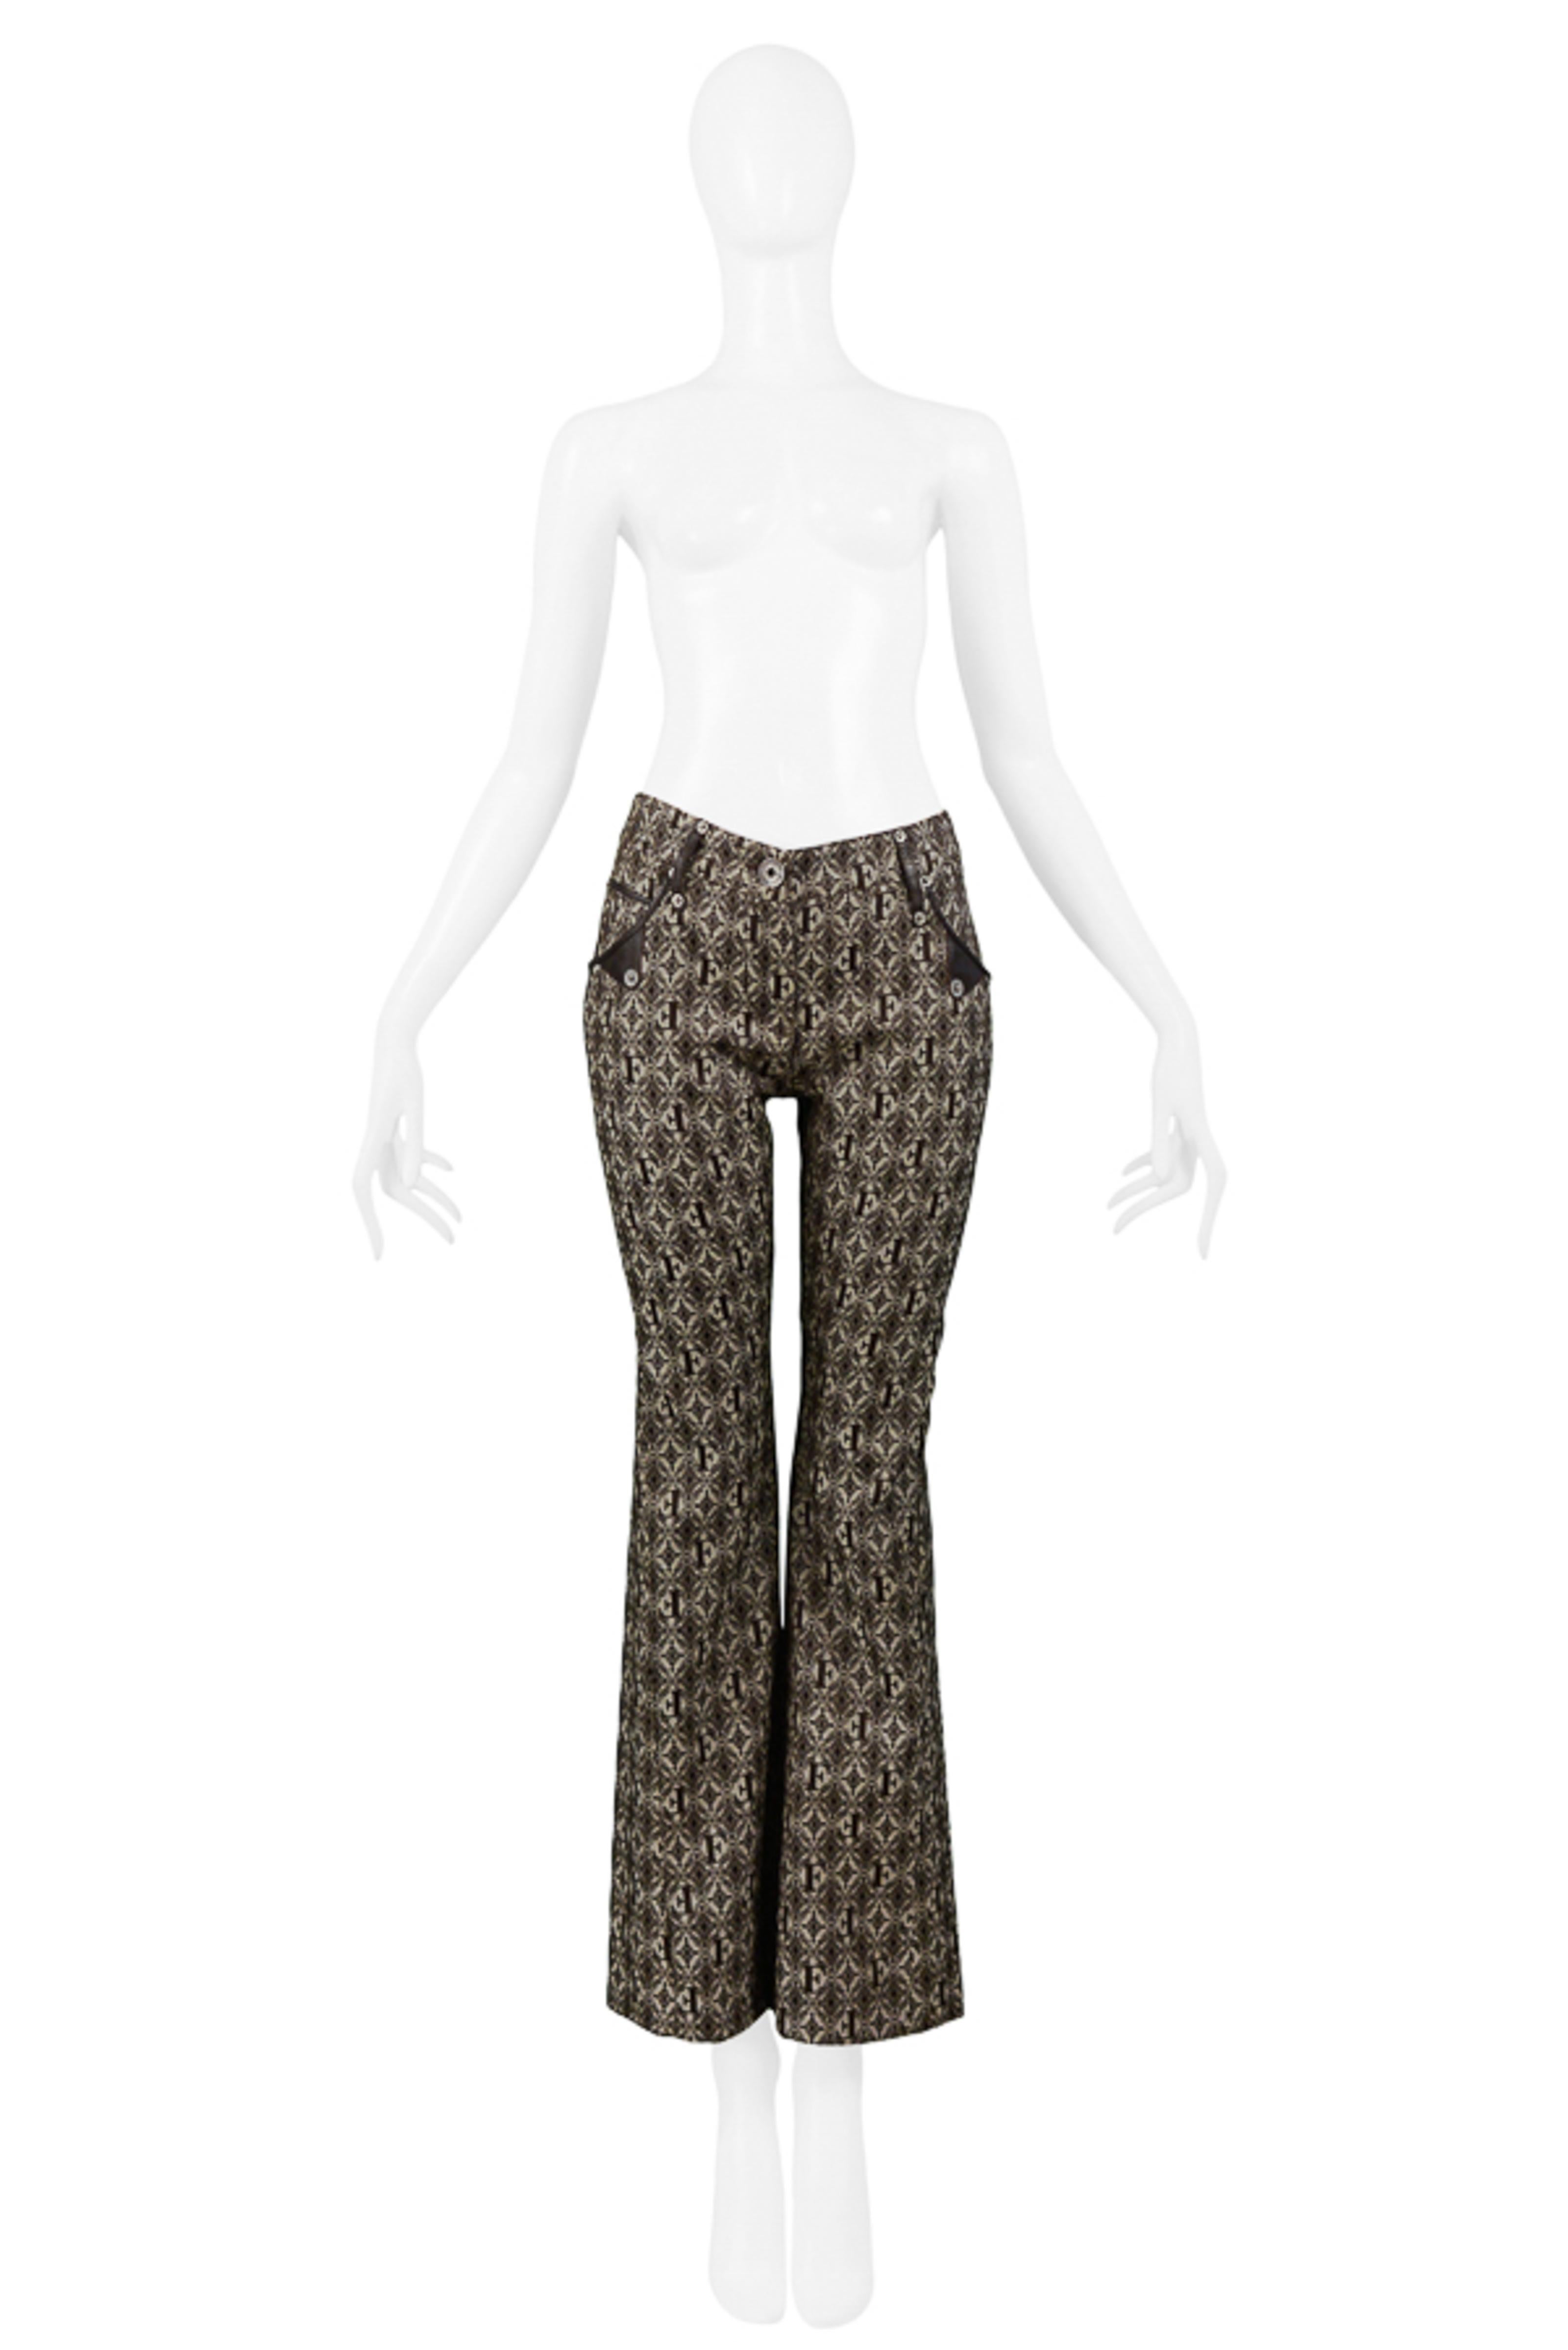 Gianfranco Ferre Brown Logo Pants With Leather Trim 2006 In Excellent Condition For Sale In Los Angeles, CA